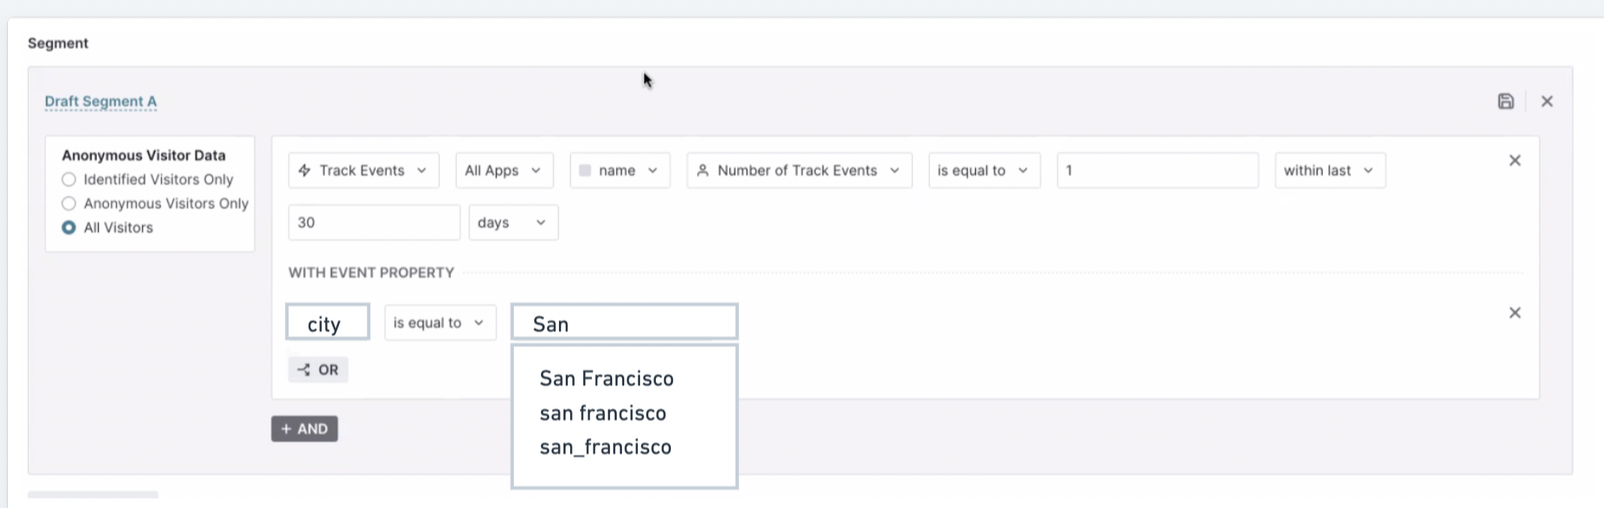 Data Explorer: Search for event property values when building segments or in group bys